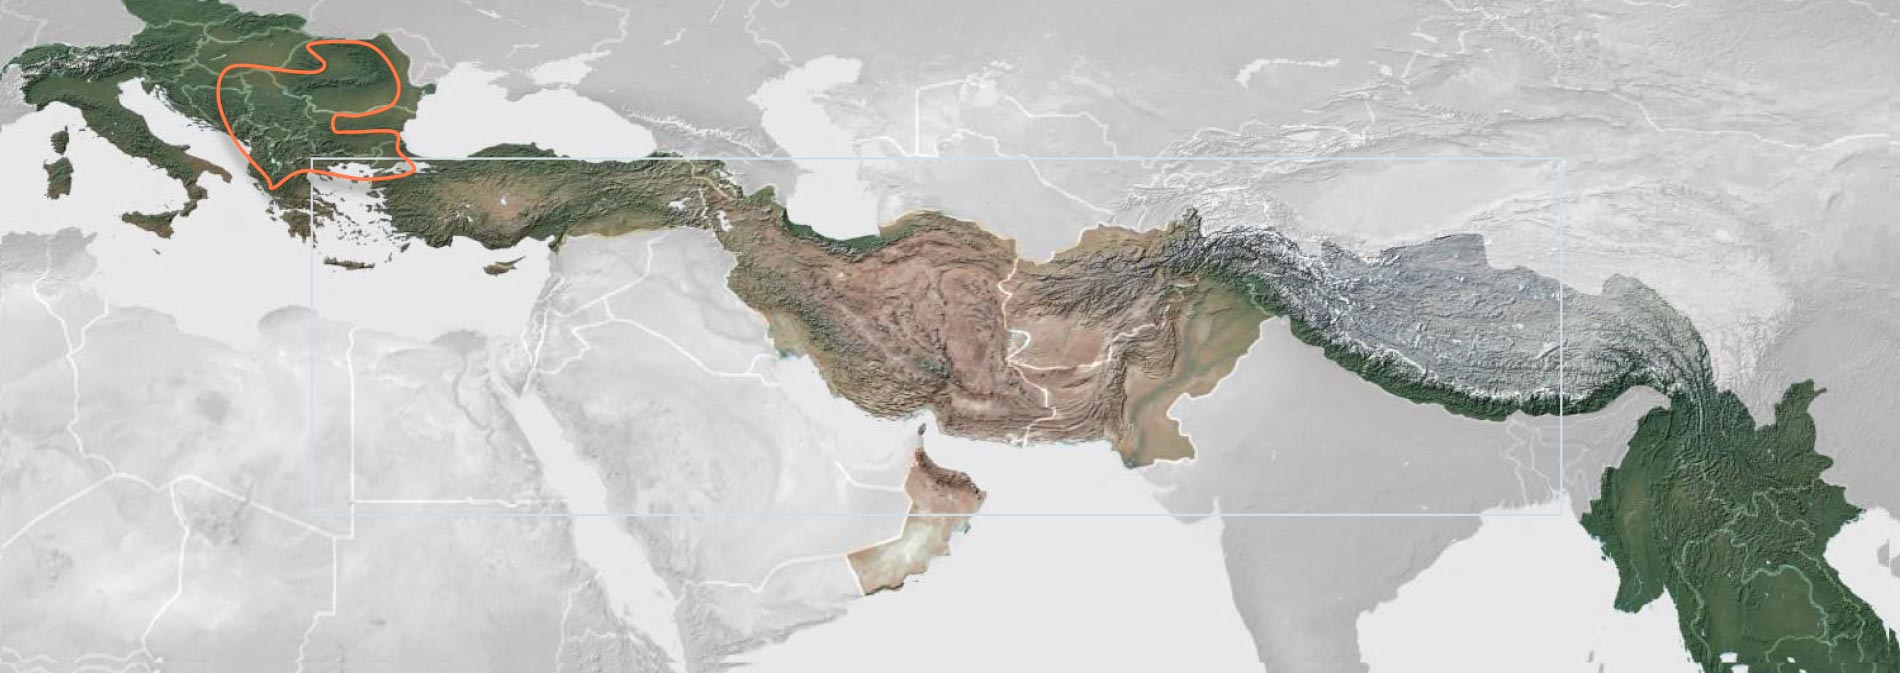 The Tethyan Mineral Belt extends over 10,000km from Asia to the Balkans and is comparable to the Andes and Western US & Canada yet significantly less explored